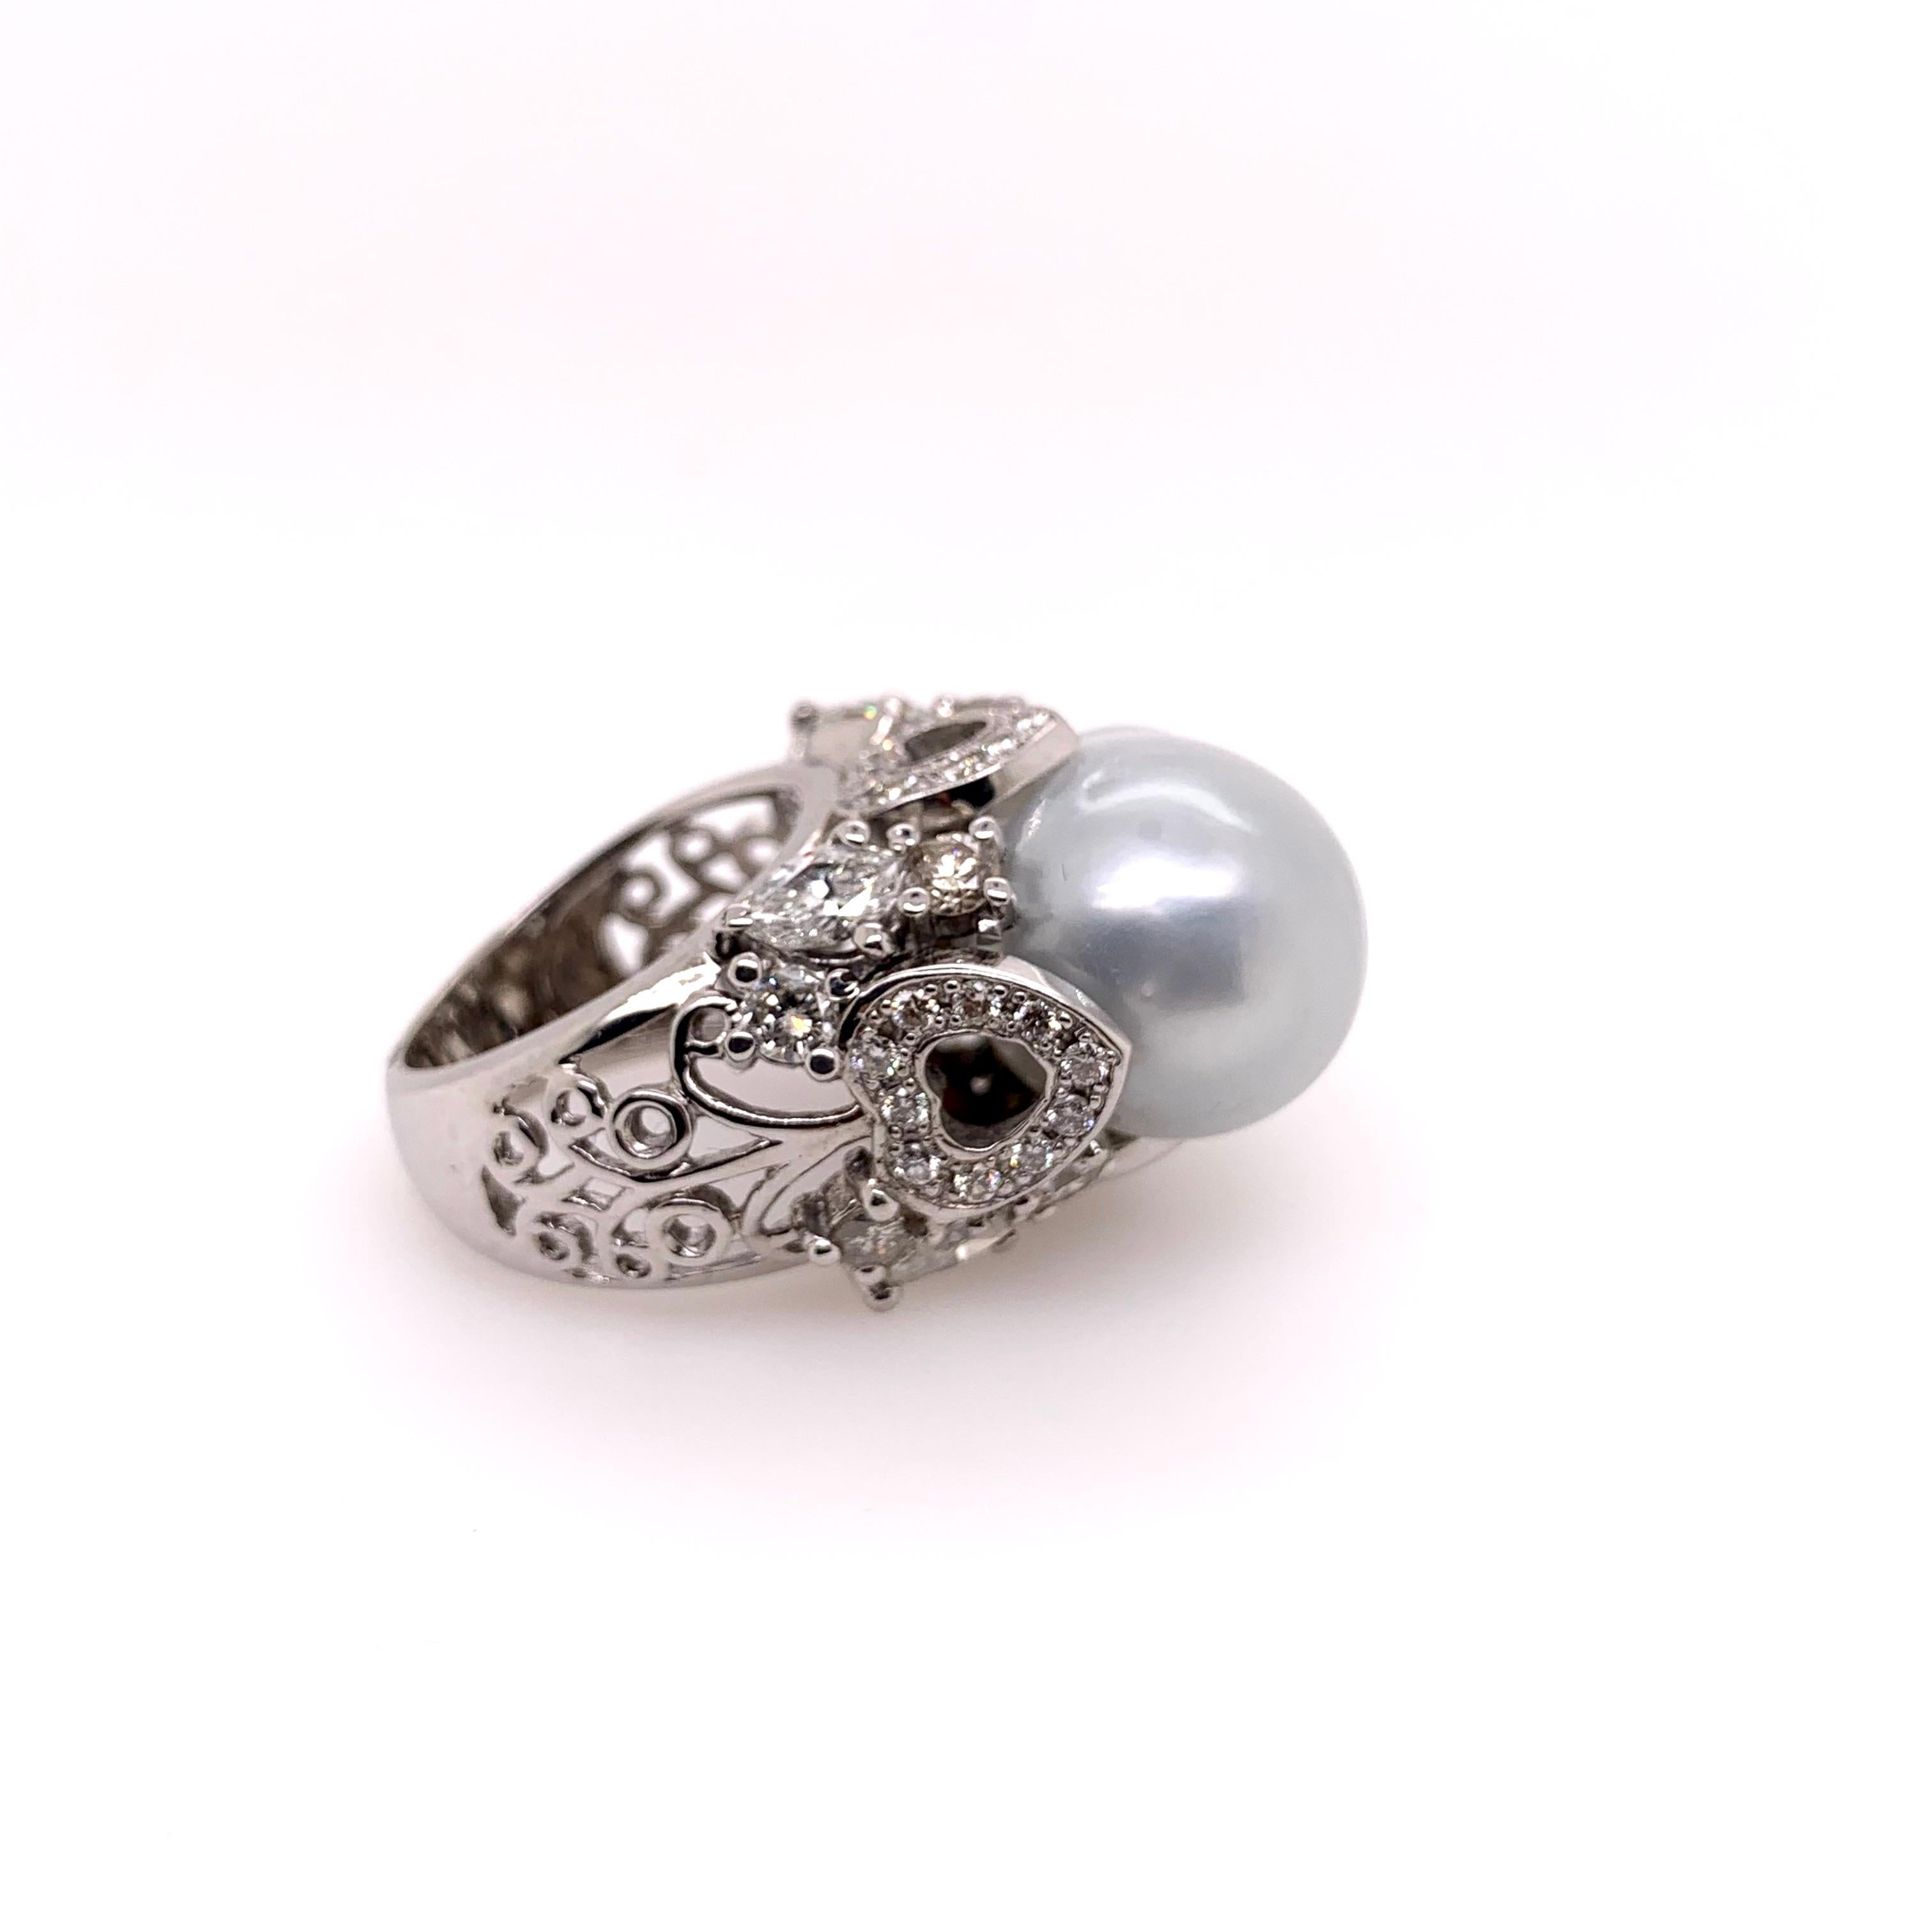 This south sea baroque pearl has a beautiful silver luster tone that accentuates this giant size pearl.  The 14k white gold setting has a high profile that accentuates the different diamond shapes and grasps the large pearl.  The diamonds come to